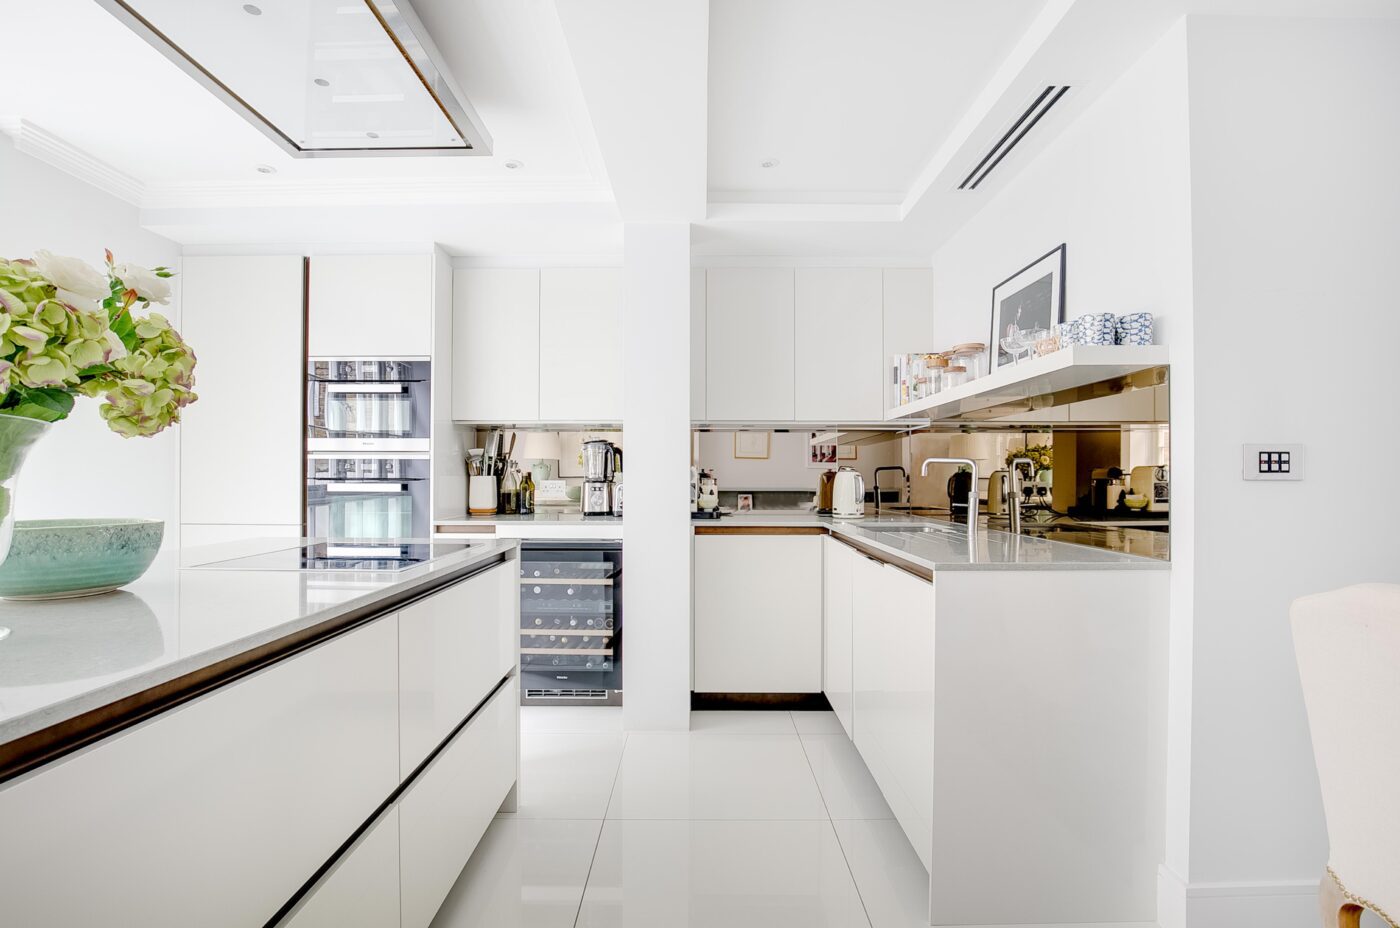 Flat for sale in London managed by LCP, a London buying agent